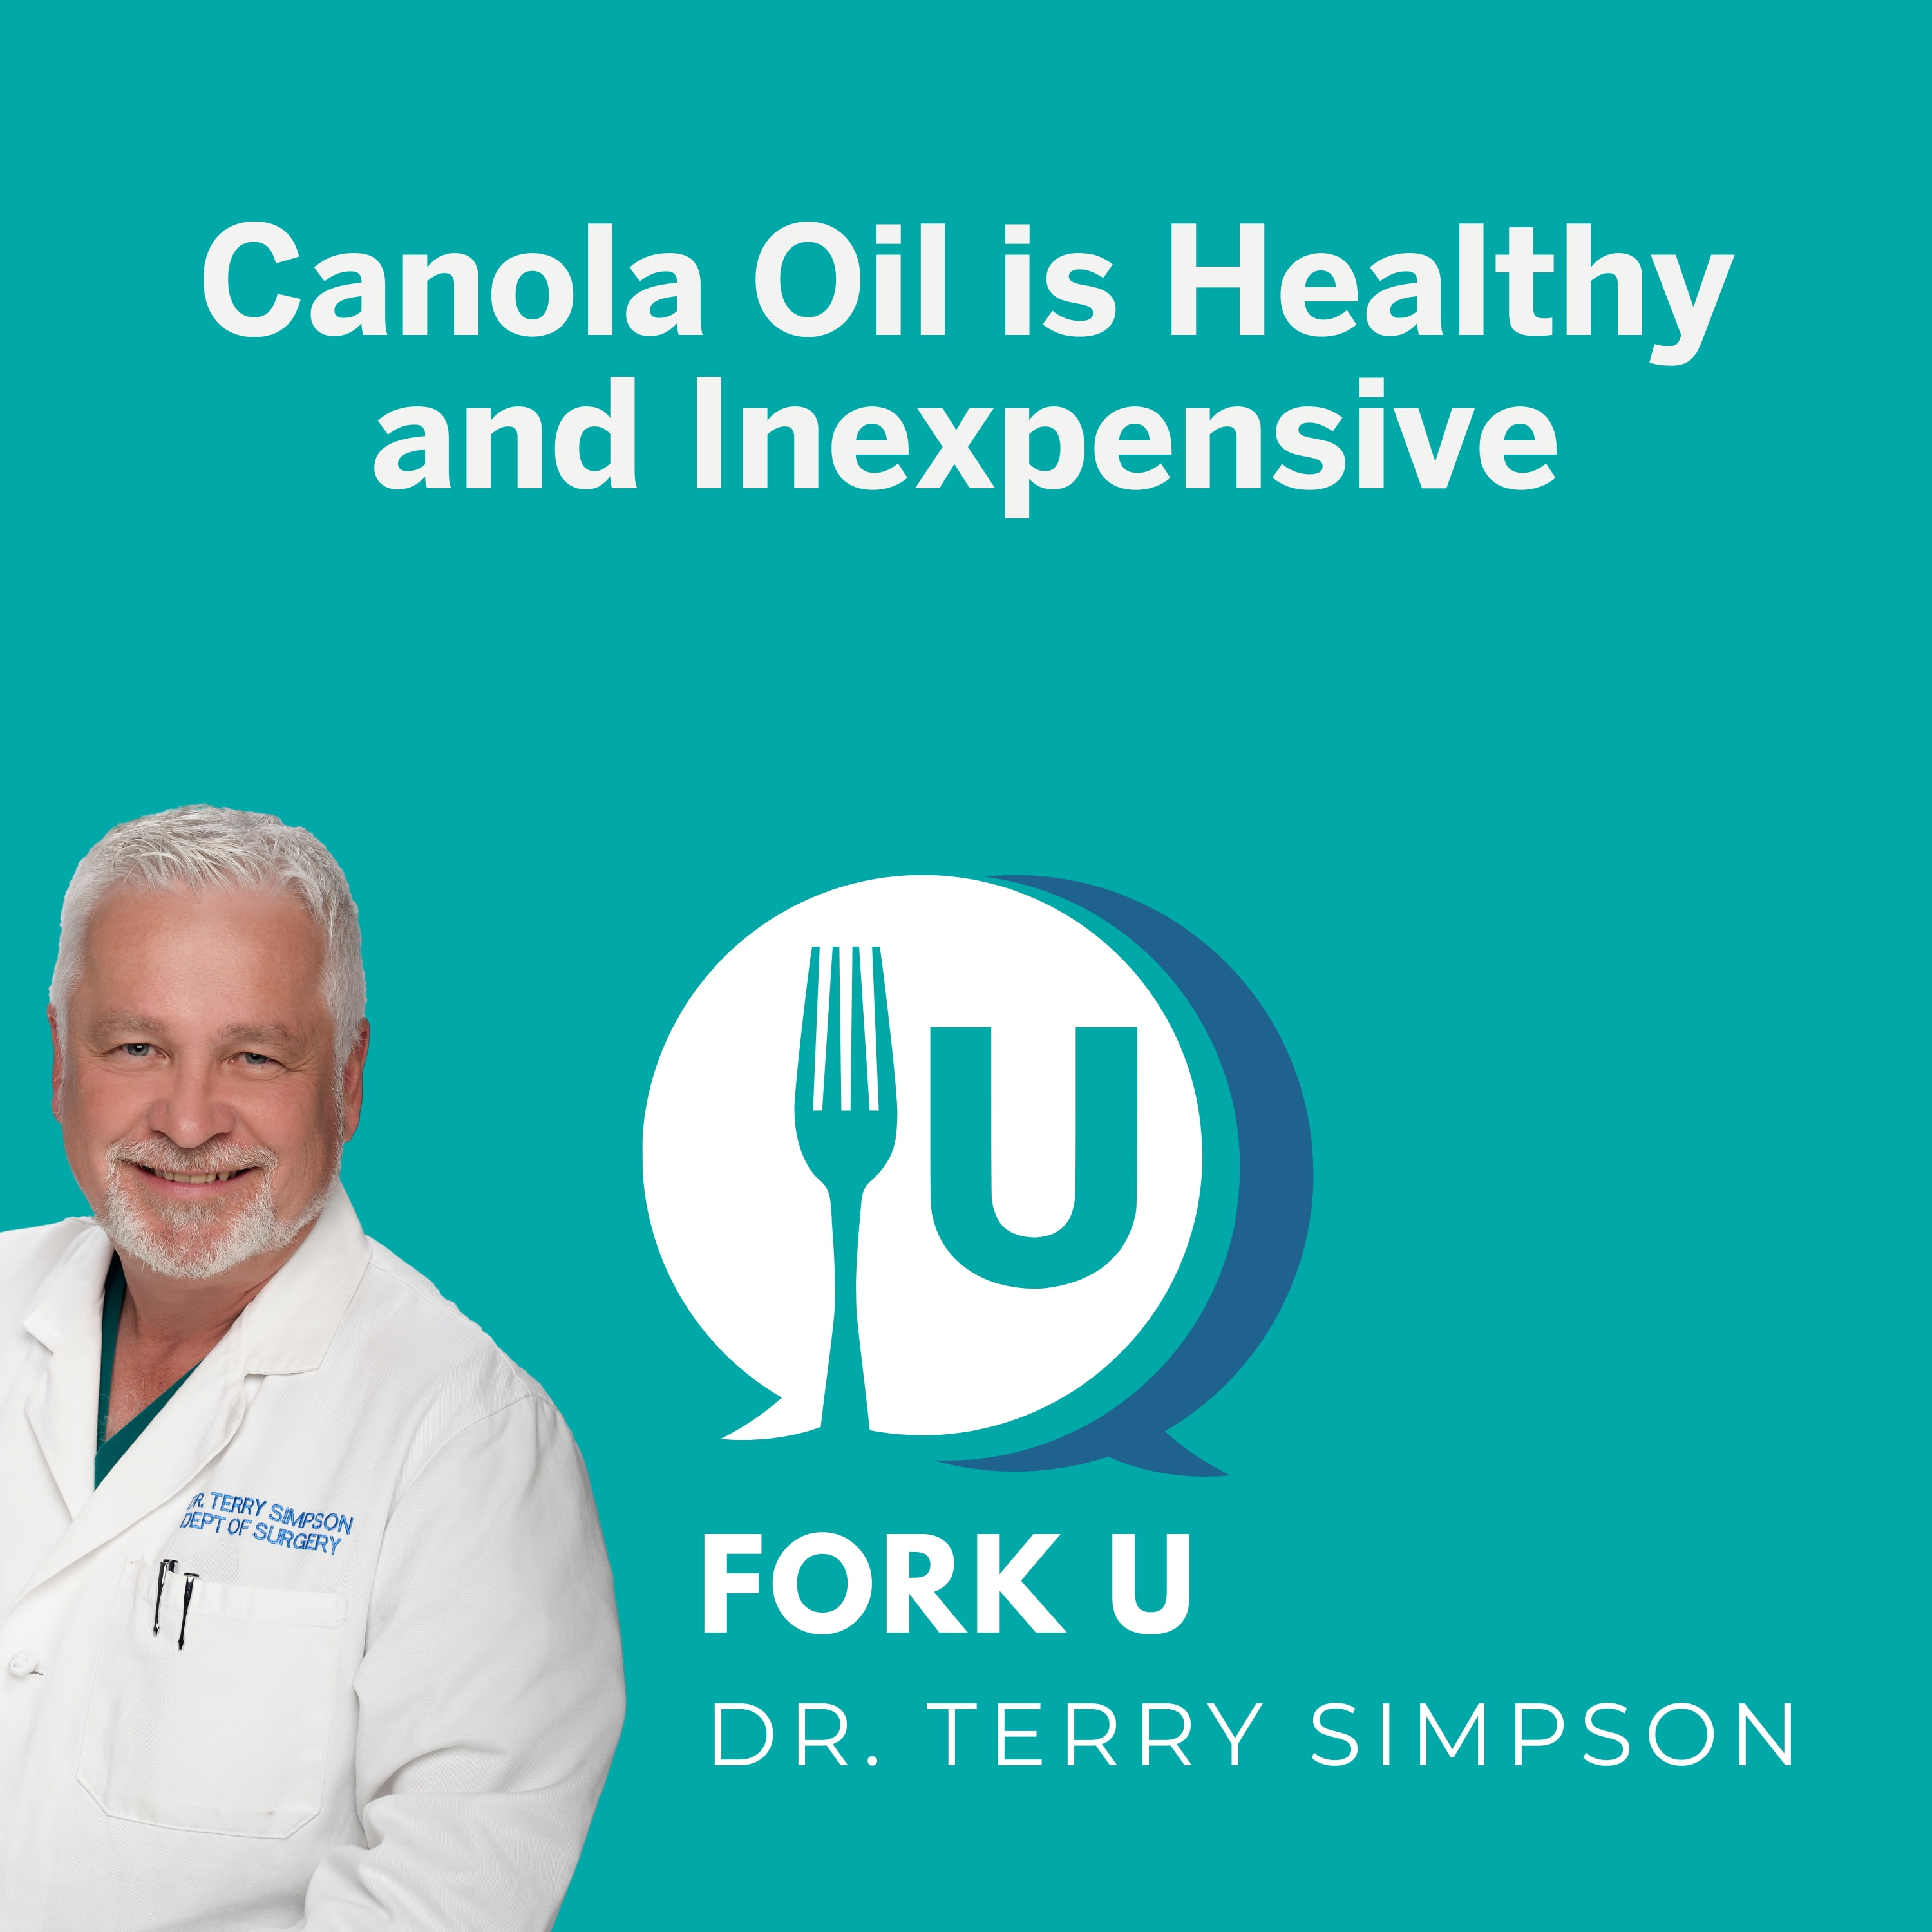 Canola Oil is Healthy and Inexpensive